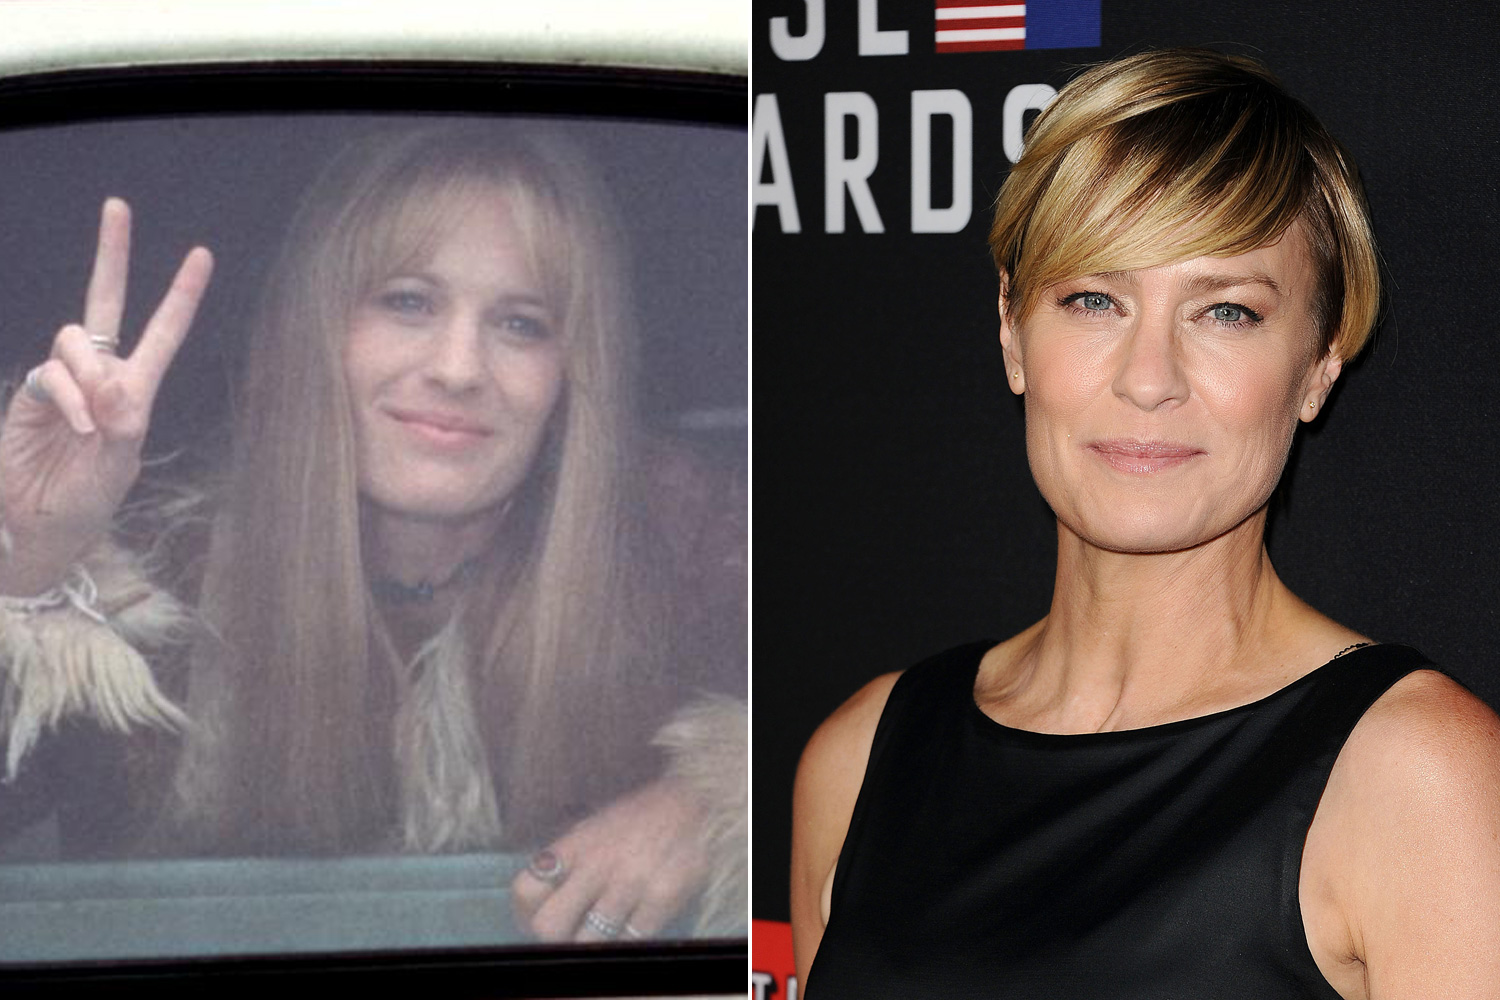 Robin Wright had an abundance of less recognizable roles in the years following  Forrest Gump,  but is best known to many these days as Claire Underwood, the savvy politician's wife in Netflix's  House of Cards.